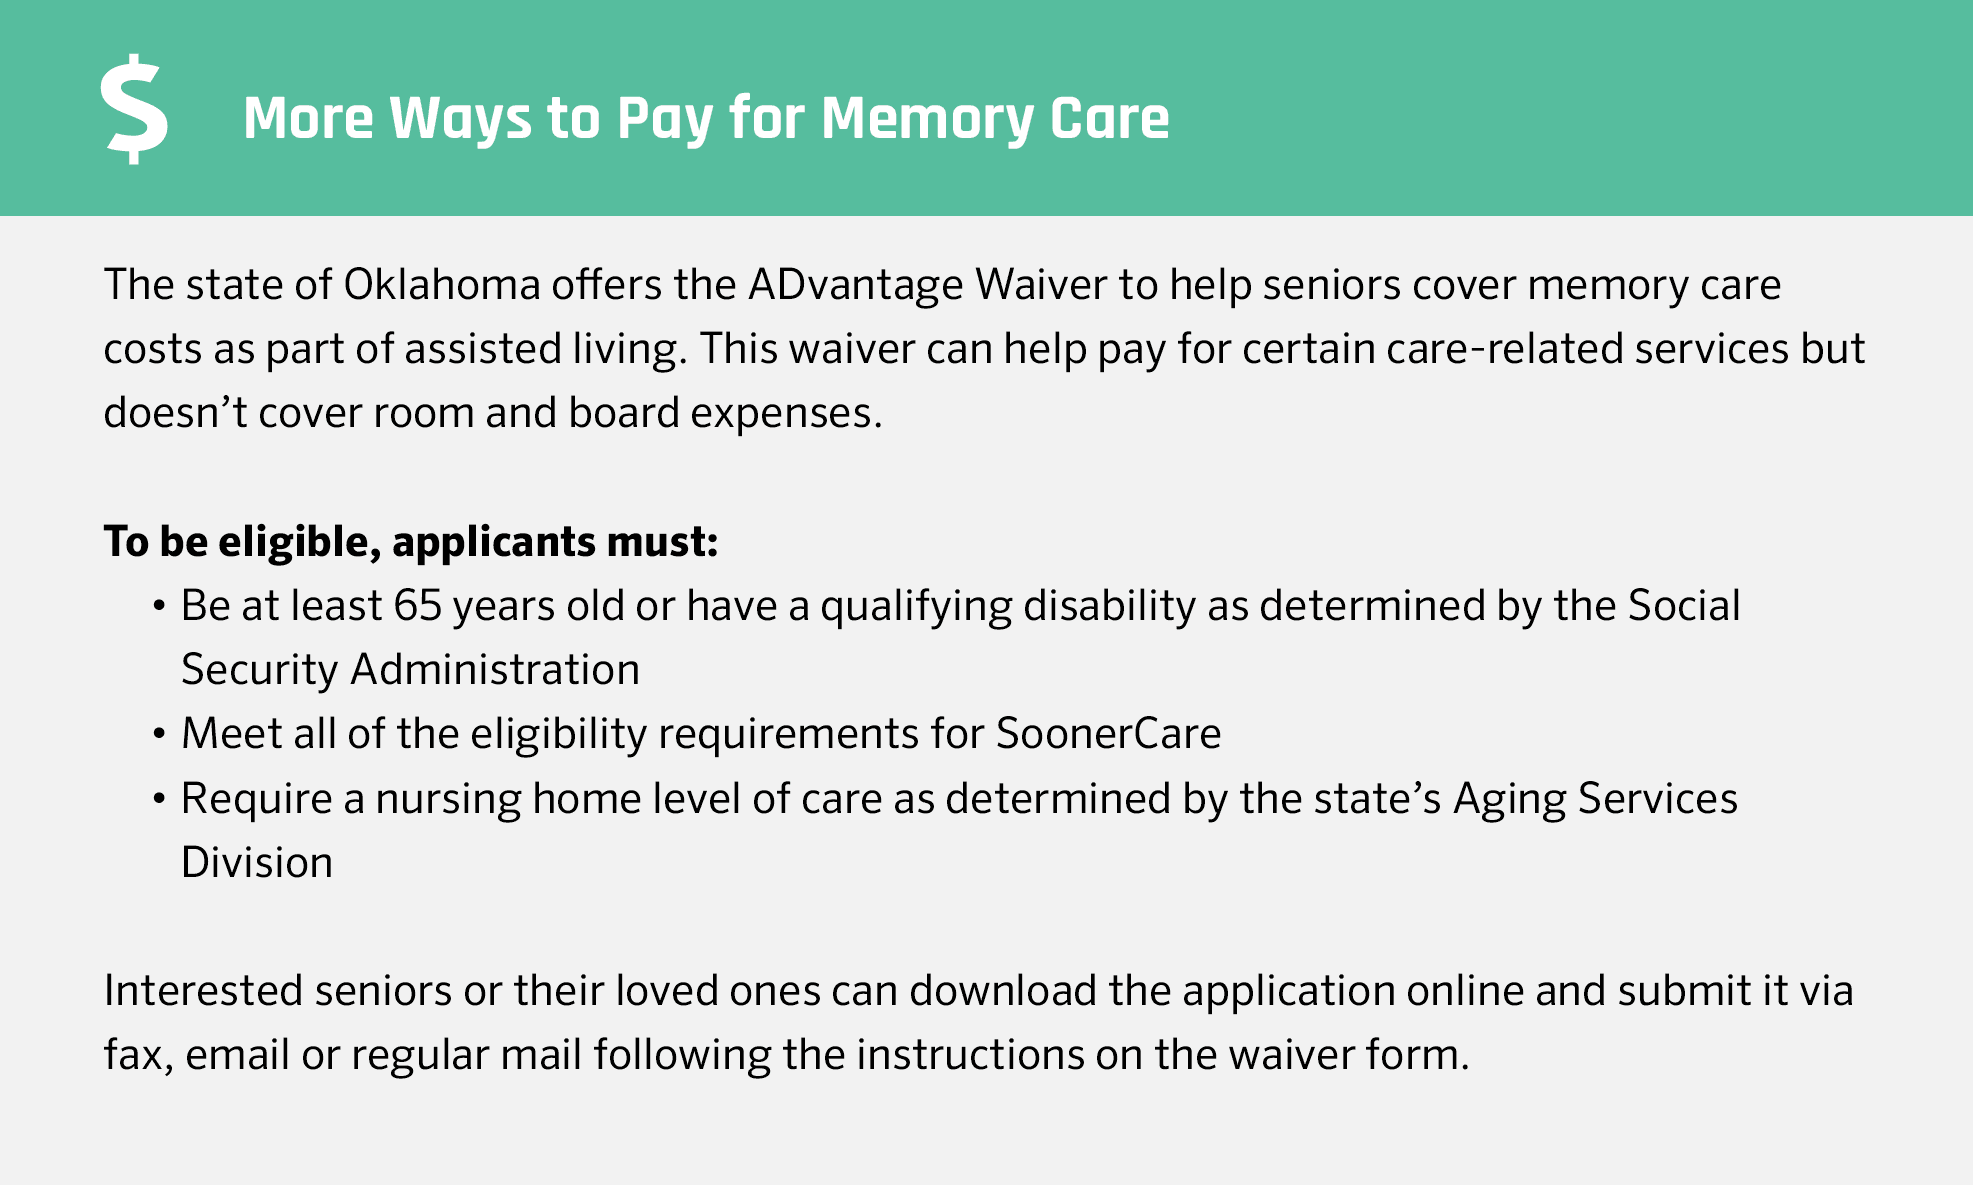 More ways to pay for memory care in Oklahoma